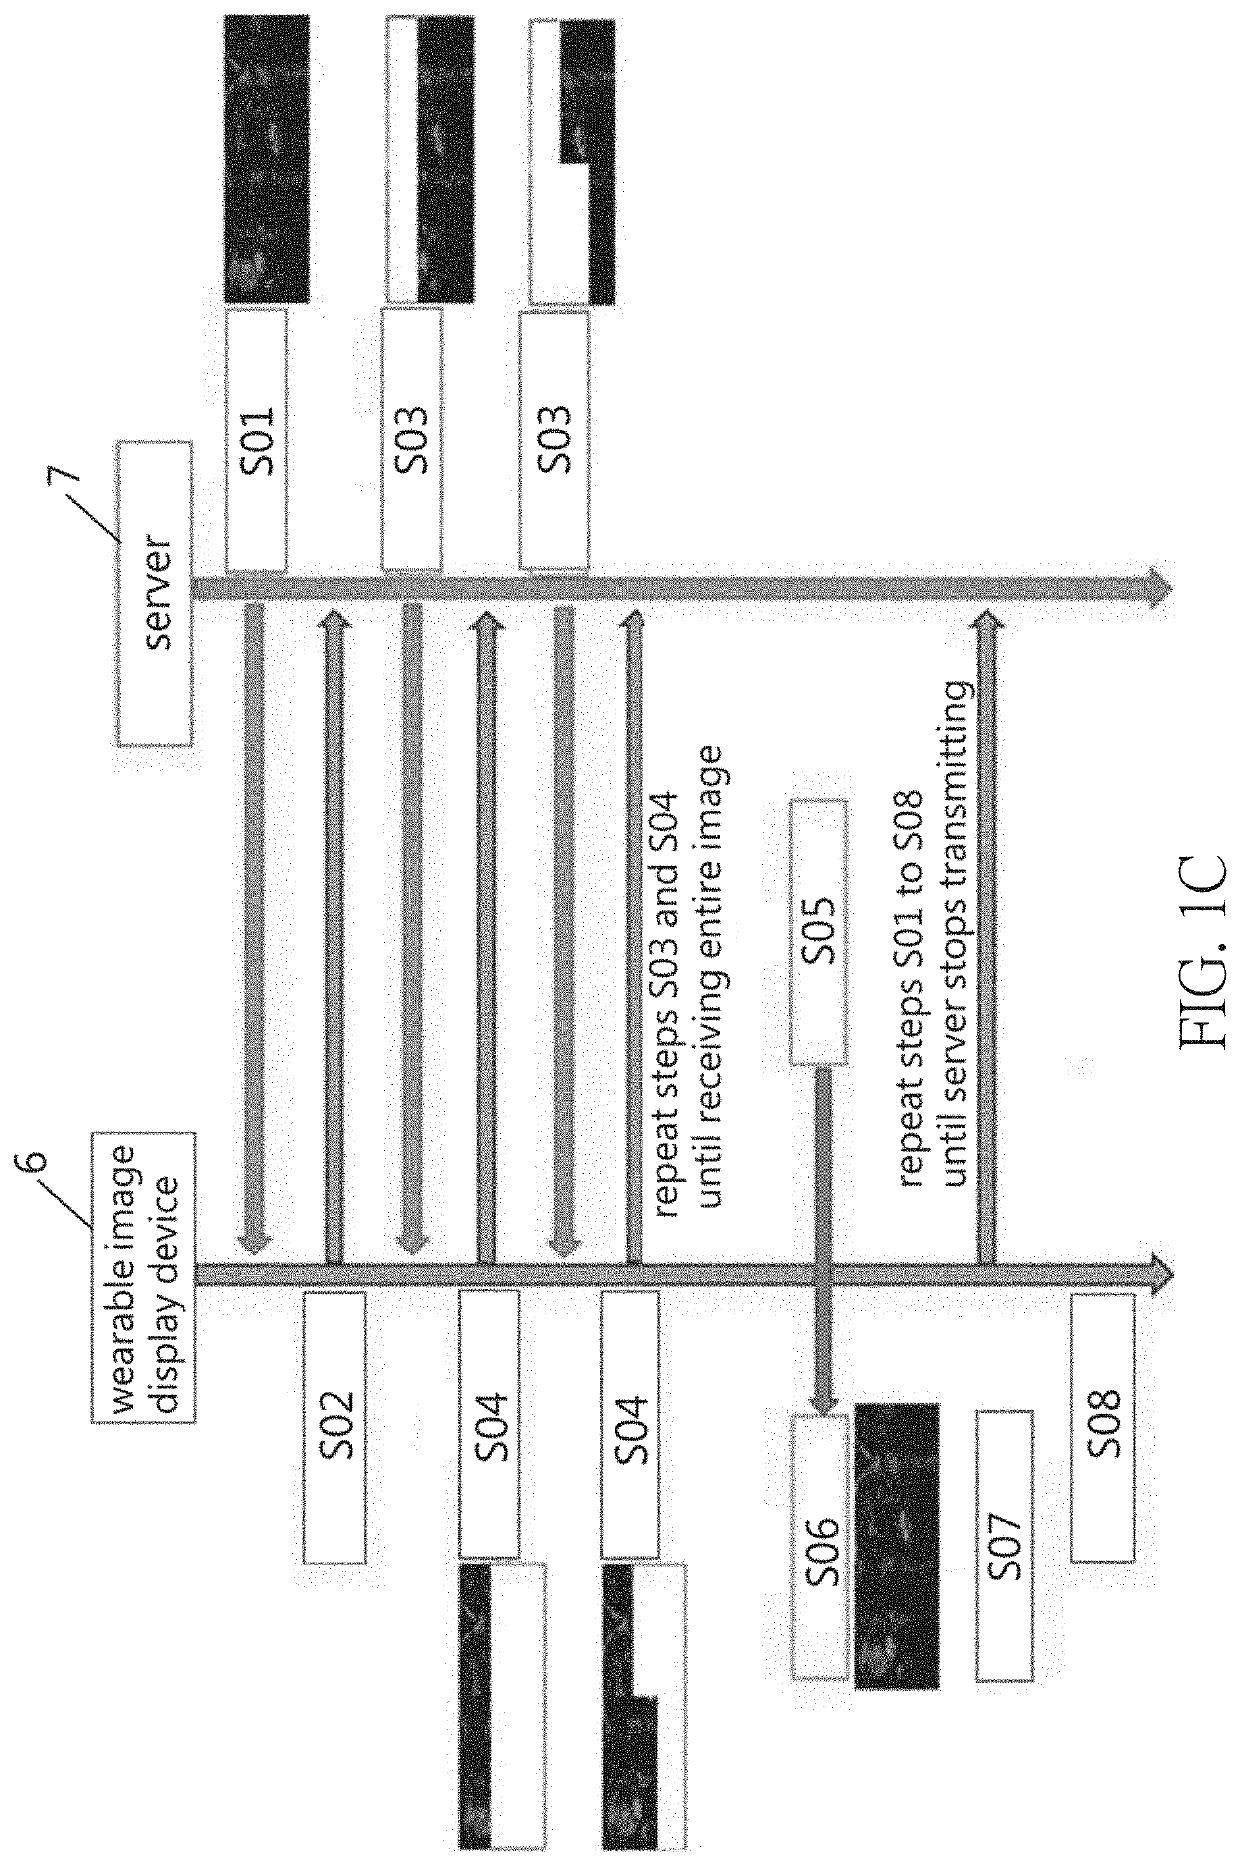 Wearable image display device for surgery and surgery information real-time display system